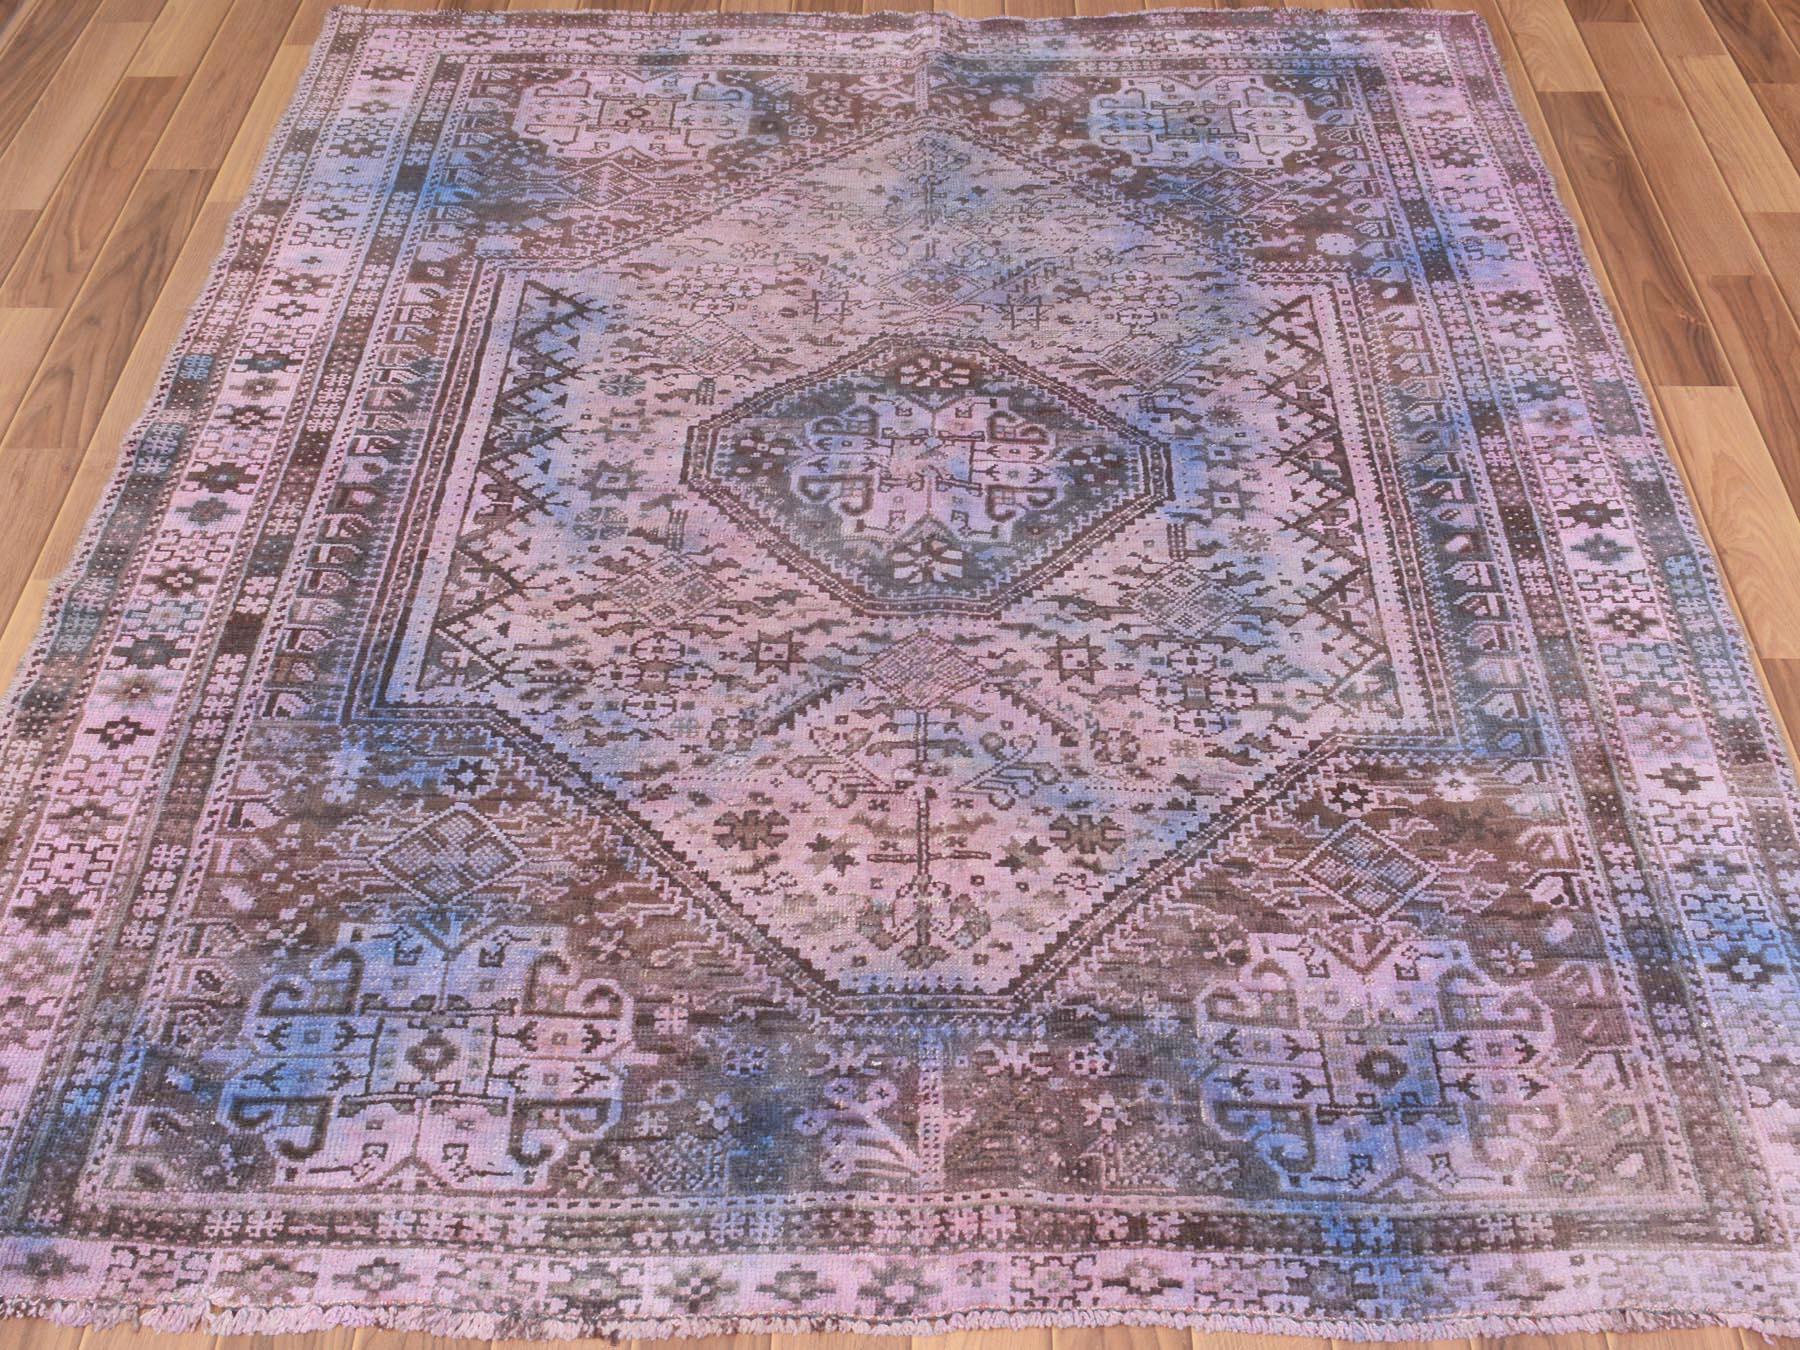 This fabulous hand knotted carpet has been created and designed for extra strength and durability. This rug has been handcrafted for weeks in the traditional method that is used to make rugs. This is truly a one-of-kind piece. 

Exact rug size in